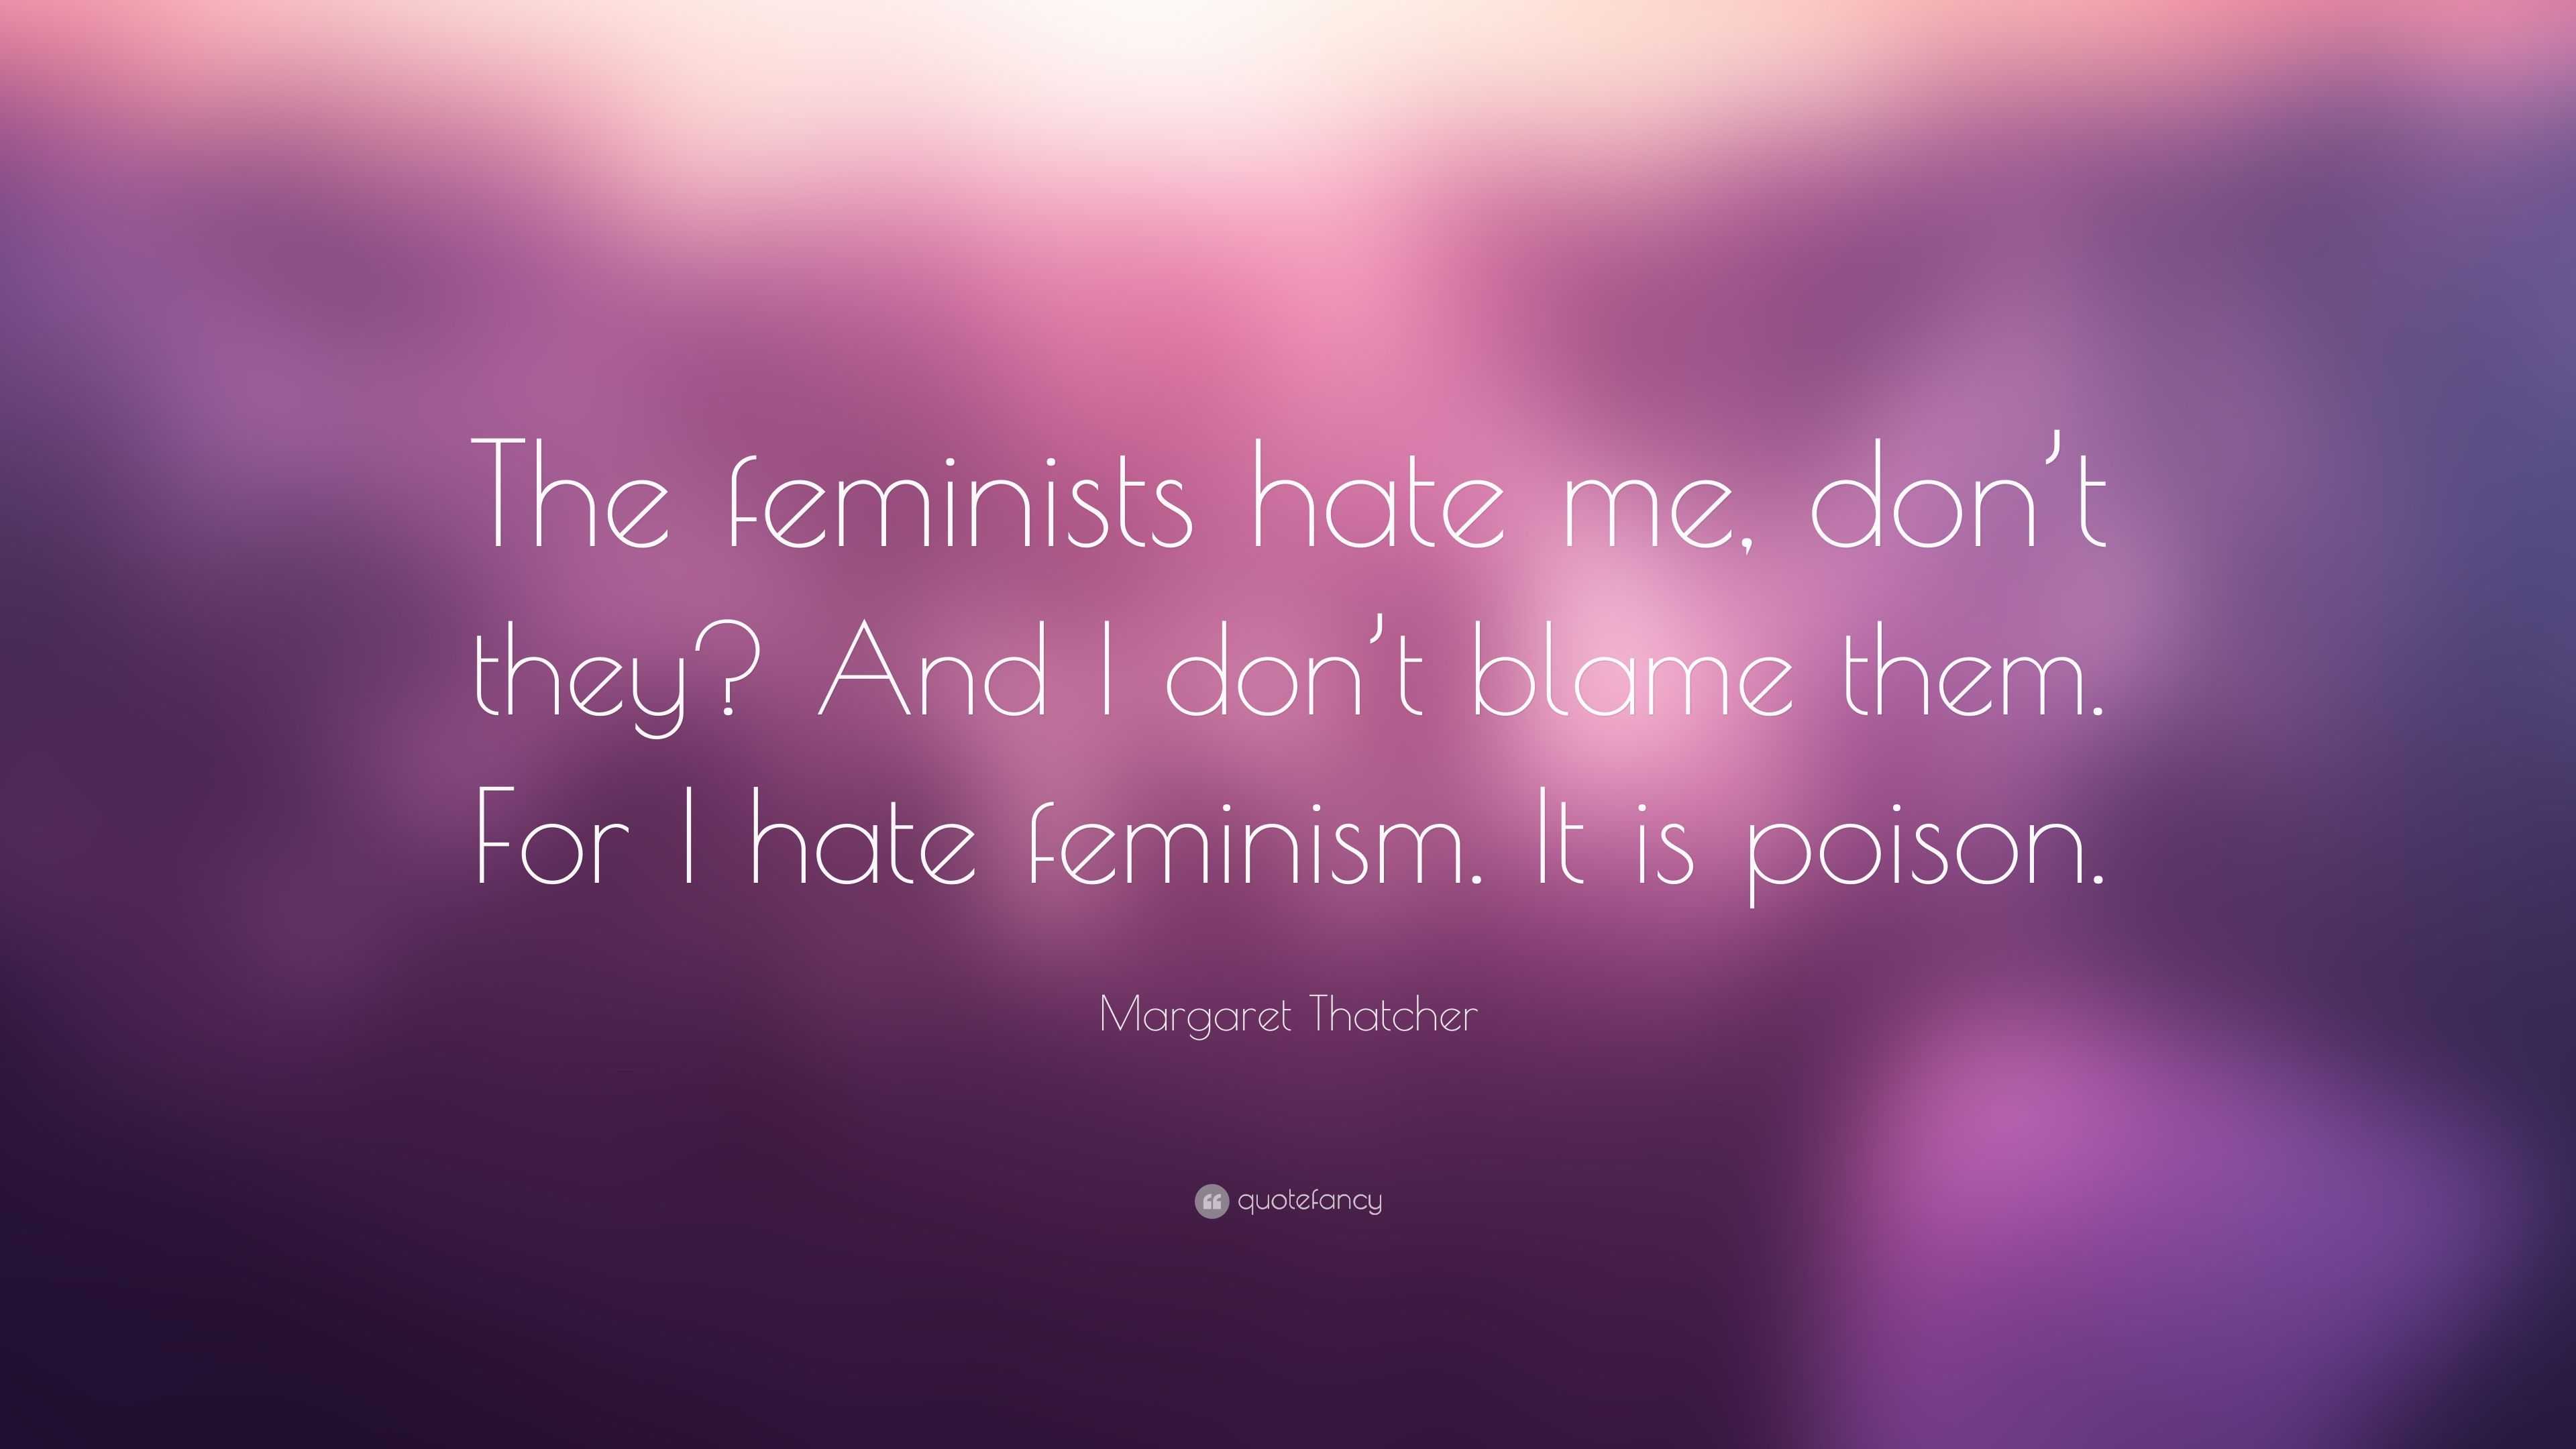 Margaret Thatcher Quote: “The feminists hate me, don’t they? And I don ...